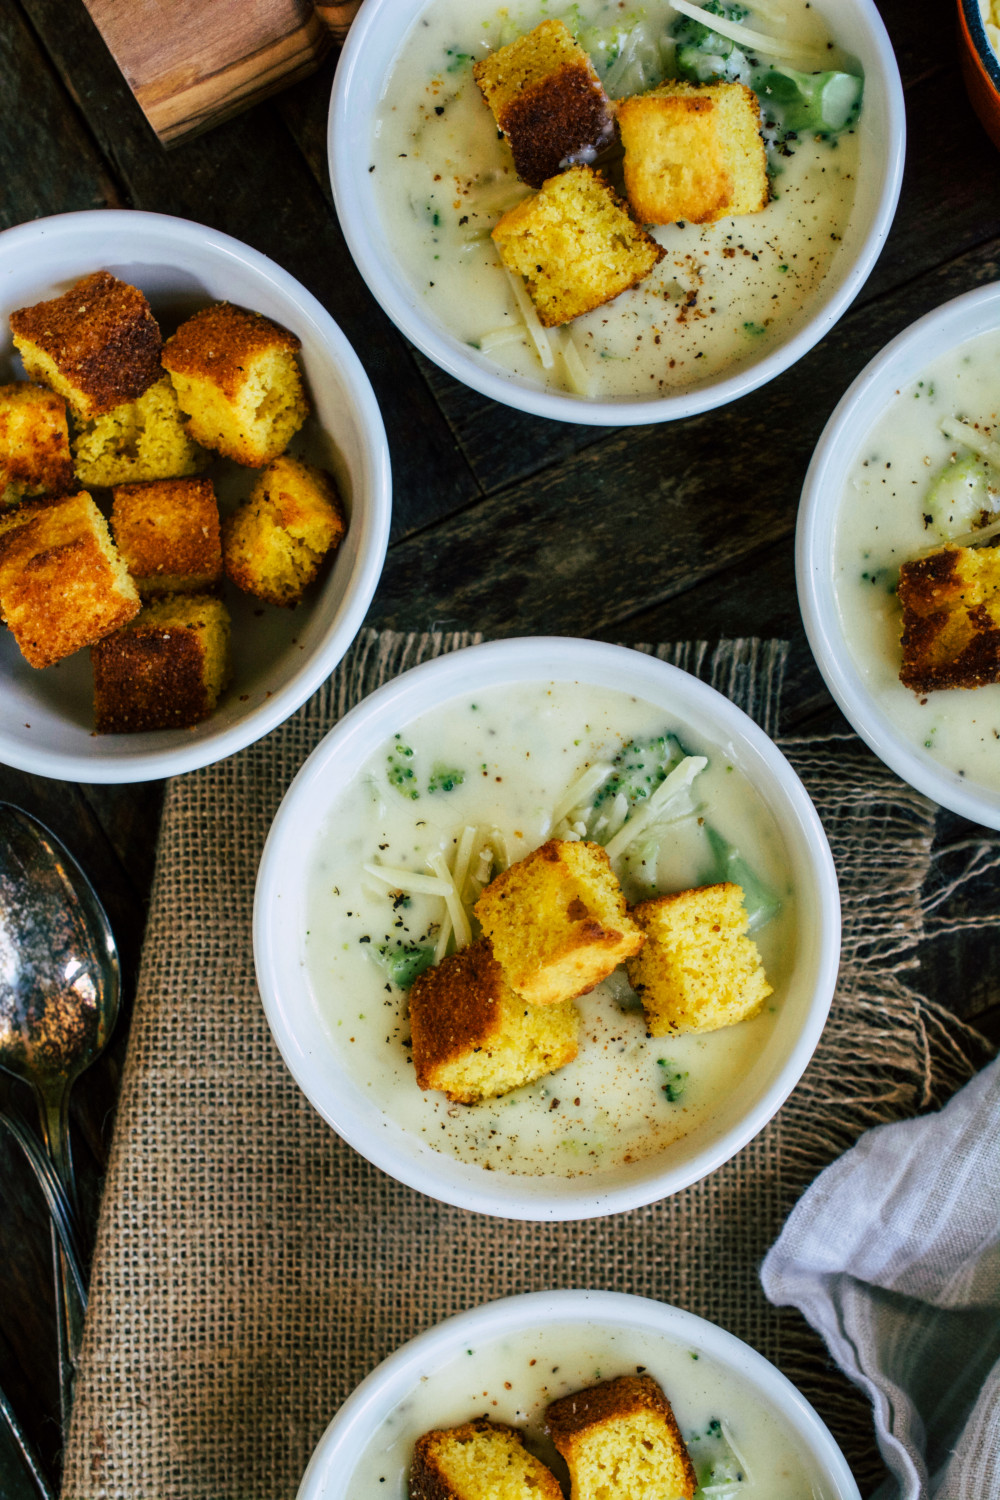 Broccoli White Cheddar Soup with Cornbread Croutons